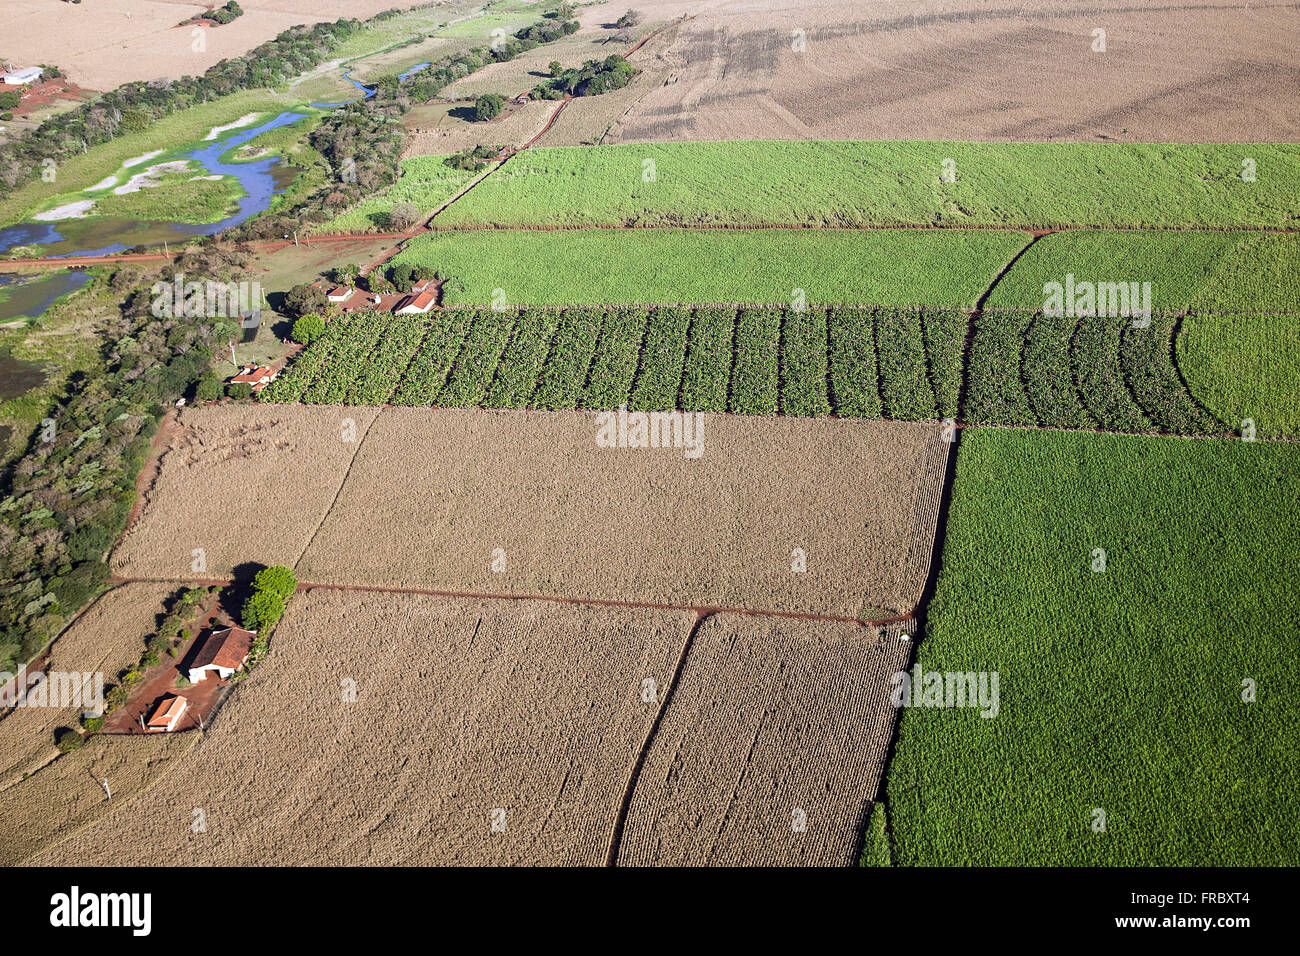 Aerial view of farm with planting corn, wheat, sugar cane and bananas Stock Photo